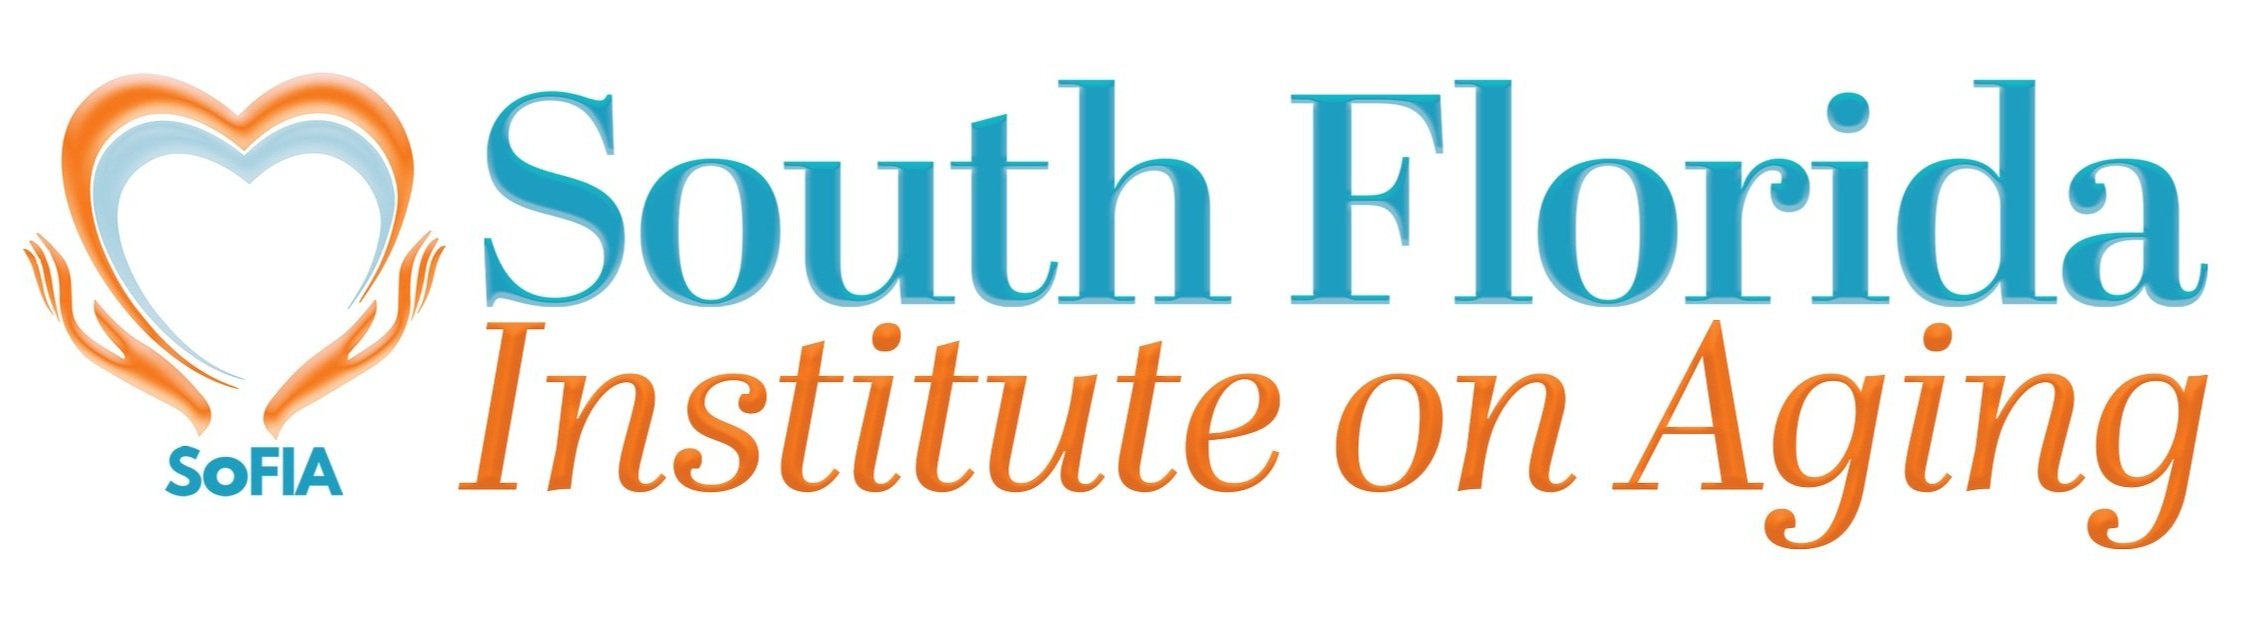 South Florida Institute on Aging